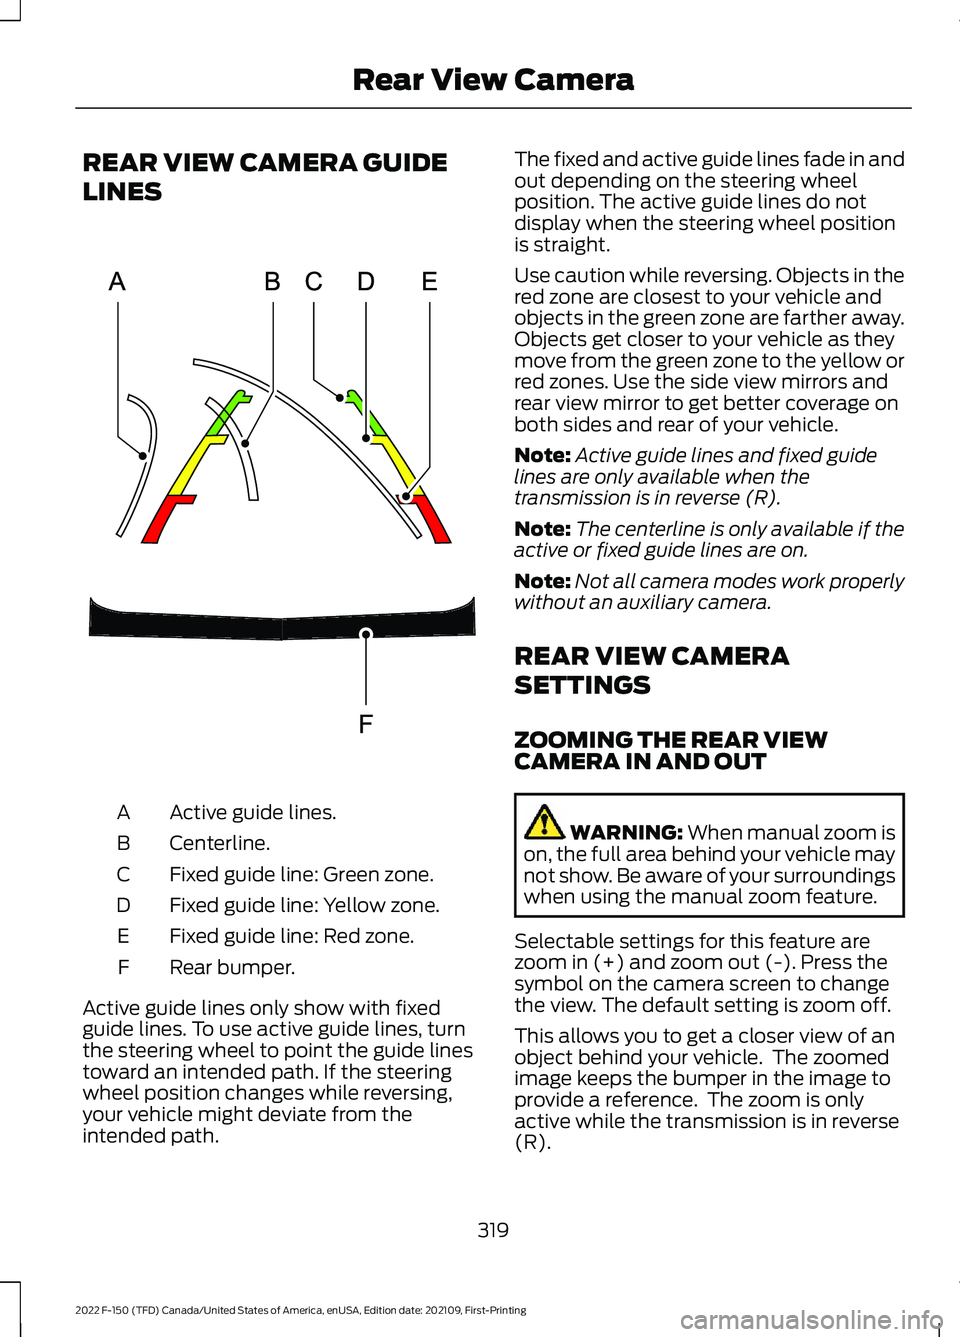 FORD F-150 2022  Owners Manual REAR VIEW CAMERA GUIDE
LINES
Active guide lines.
A
Centerline.
B
Fixed guide line: Green zone.
C
Fixed guide line: Yellow zone.
D
Fixed guide line: Red zone.
E
Rear bumper.
F
Active guide lines only s